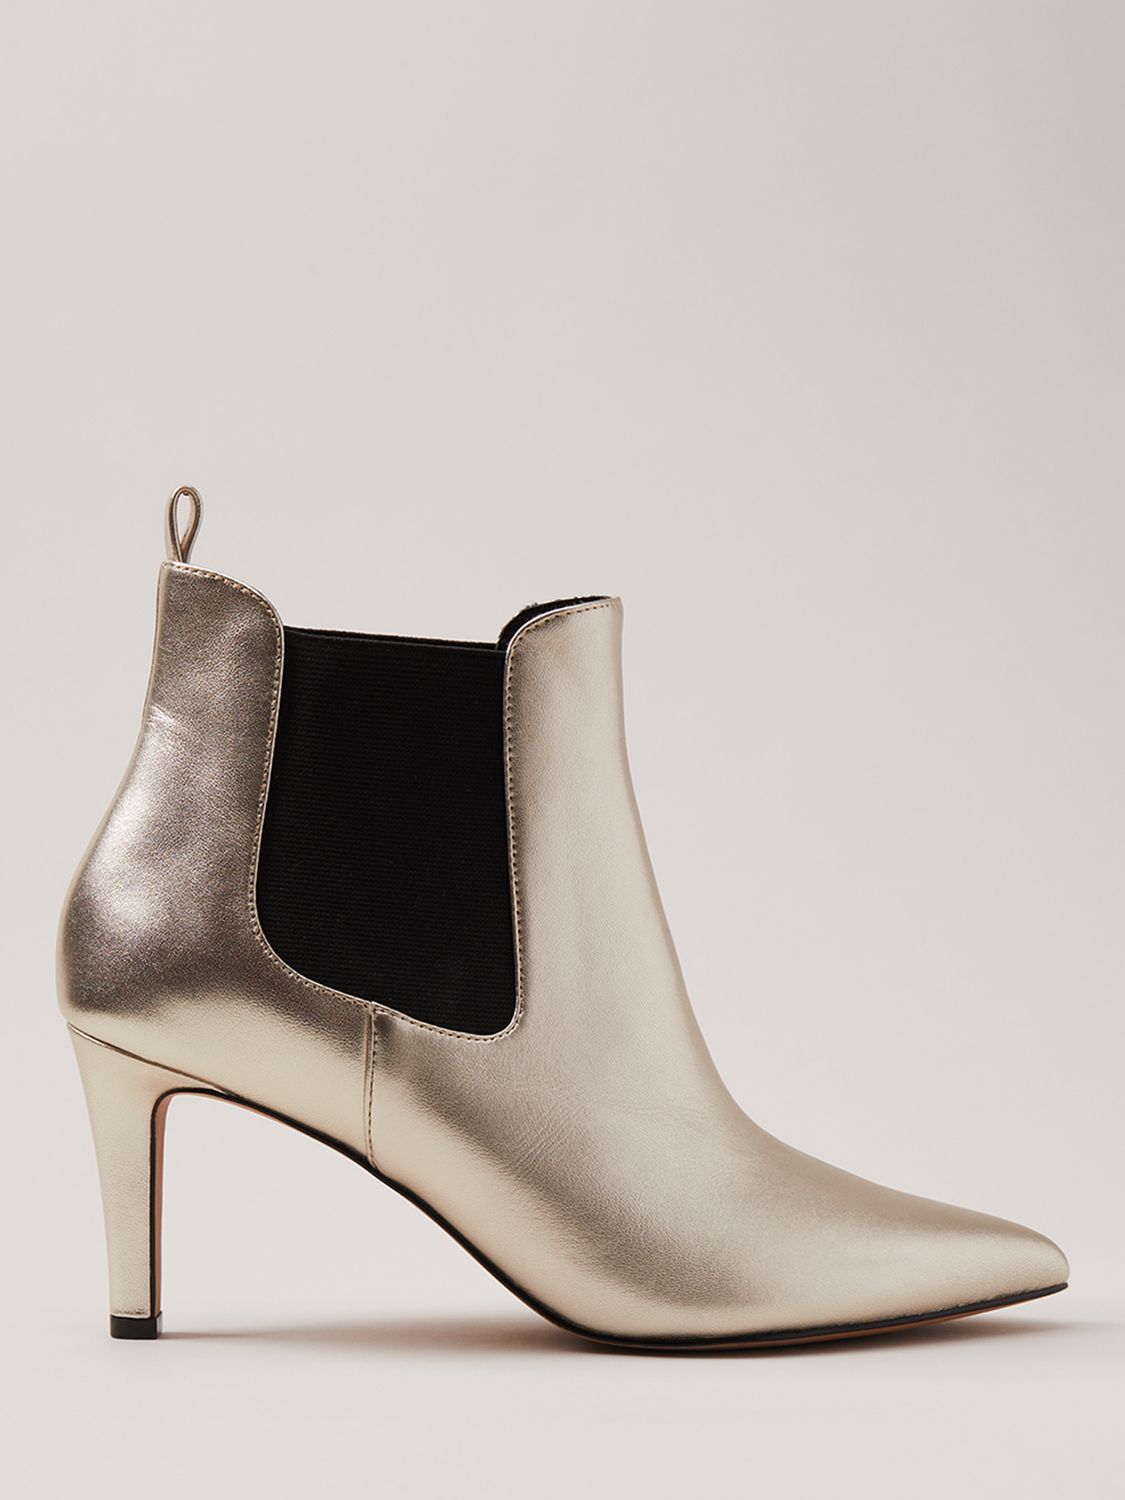 Buy Phase Eight Metallic Leather Ankle Boots, Gold Online at johnlewis.com